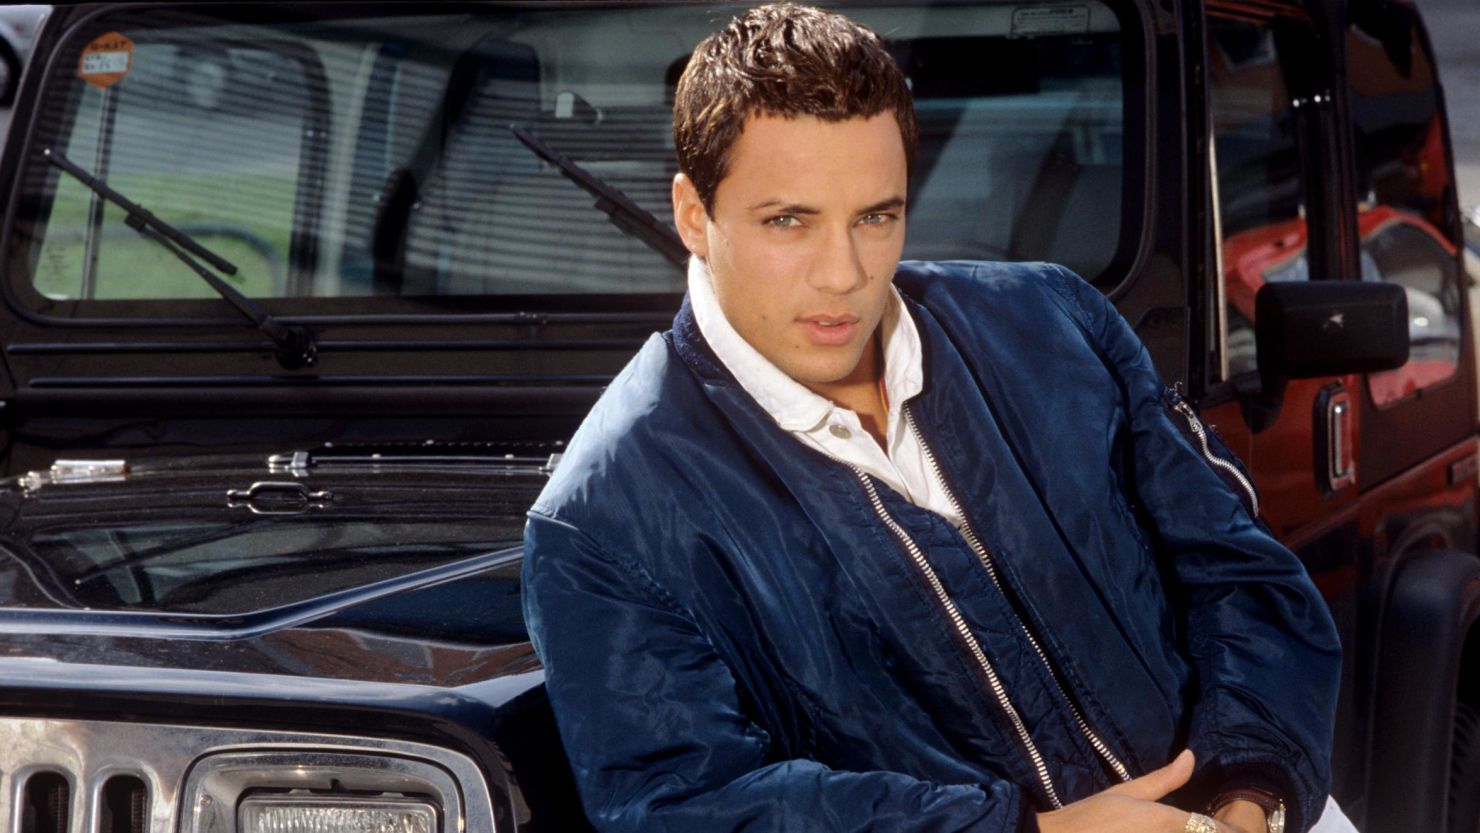 Nick Kamen, pictured here in 1990, became a sex symbol after stripping down to his boxers in a Levi's commercial.